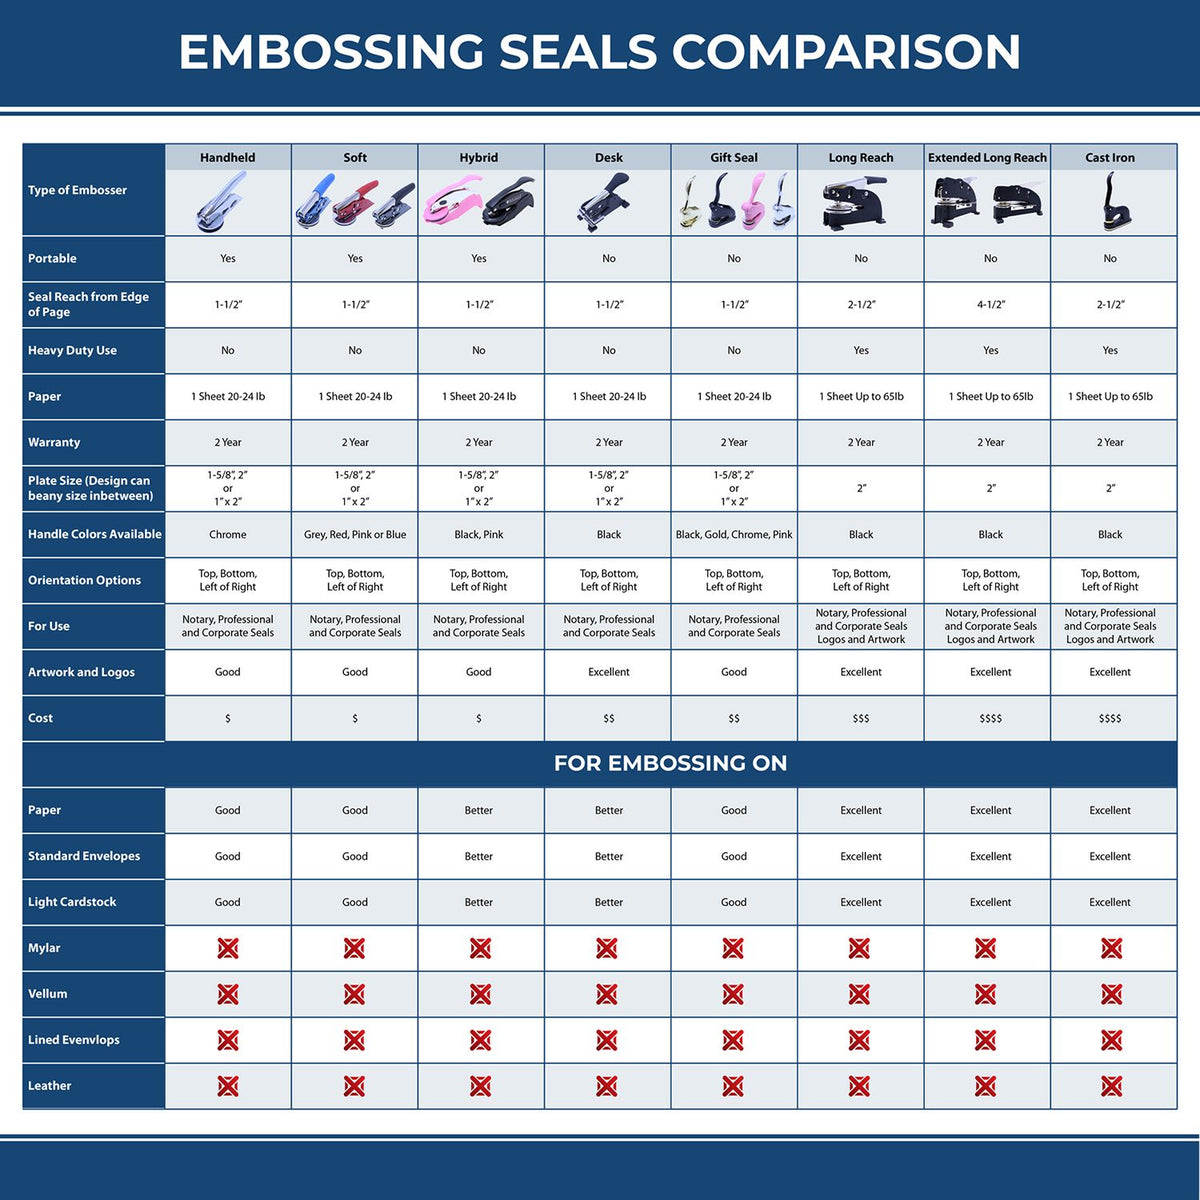 A comparison chart for the different types of mount models available for the Long Reach Massachusetts Land Surveyor Seal.